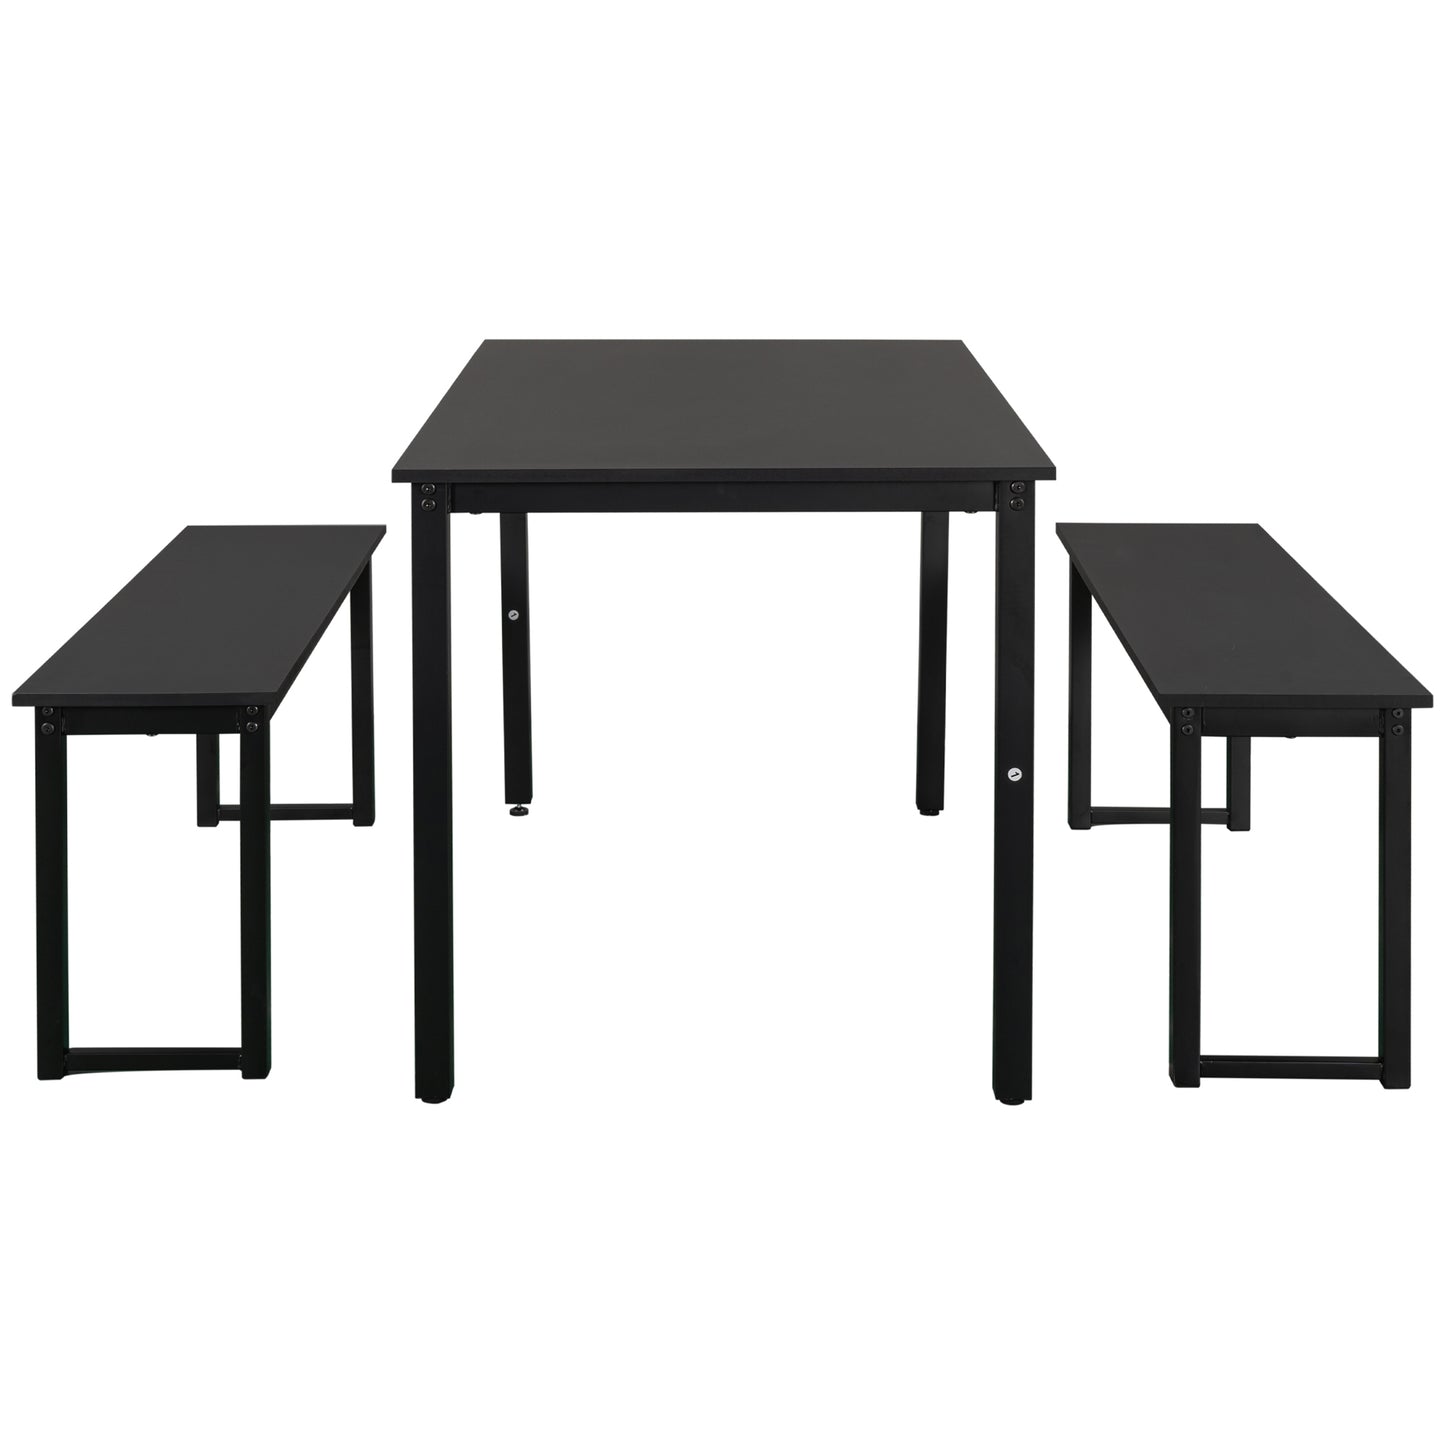 3 Pieces Modern Kitchen Table Set, High Counter Dining Table w/ 2 Benches, Stylish Dining Table Furniture Set, 4-Person Space-Saving Dinette, Modern Pub Table Set, Elegant Bistro Table Set, C14